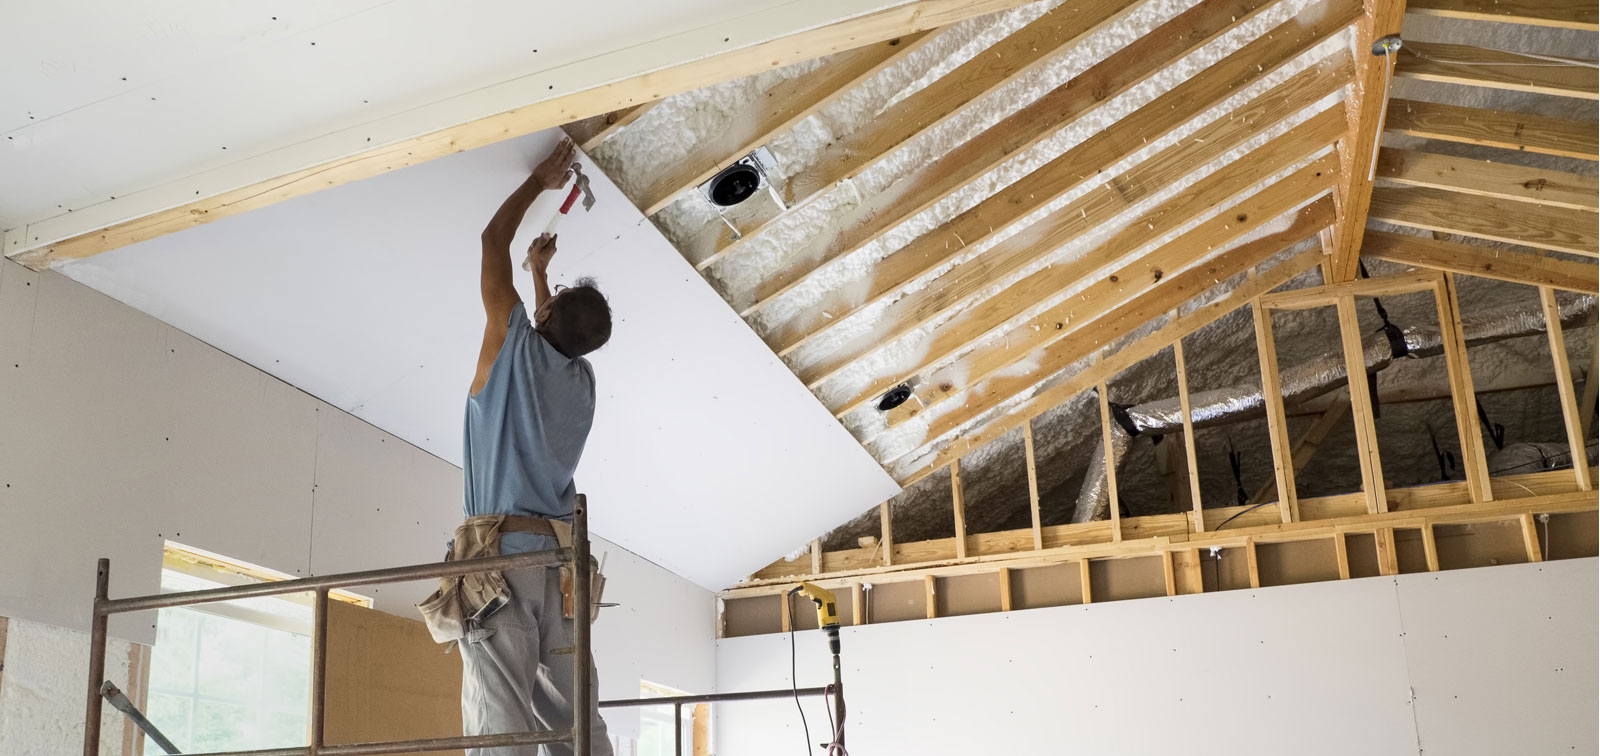 Was Sheetrock a Game-Changer in Construction?